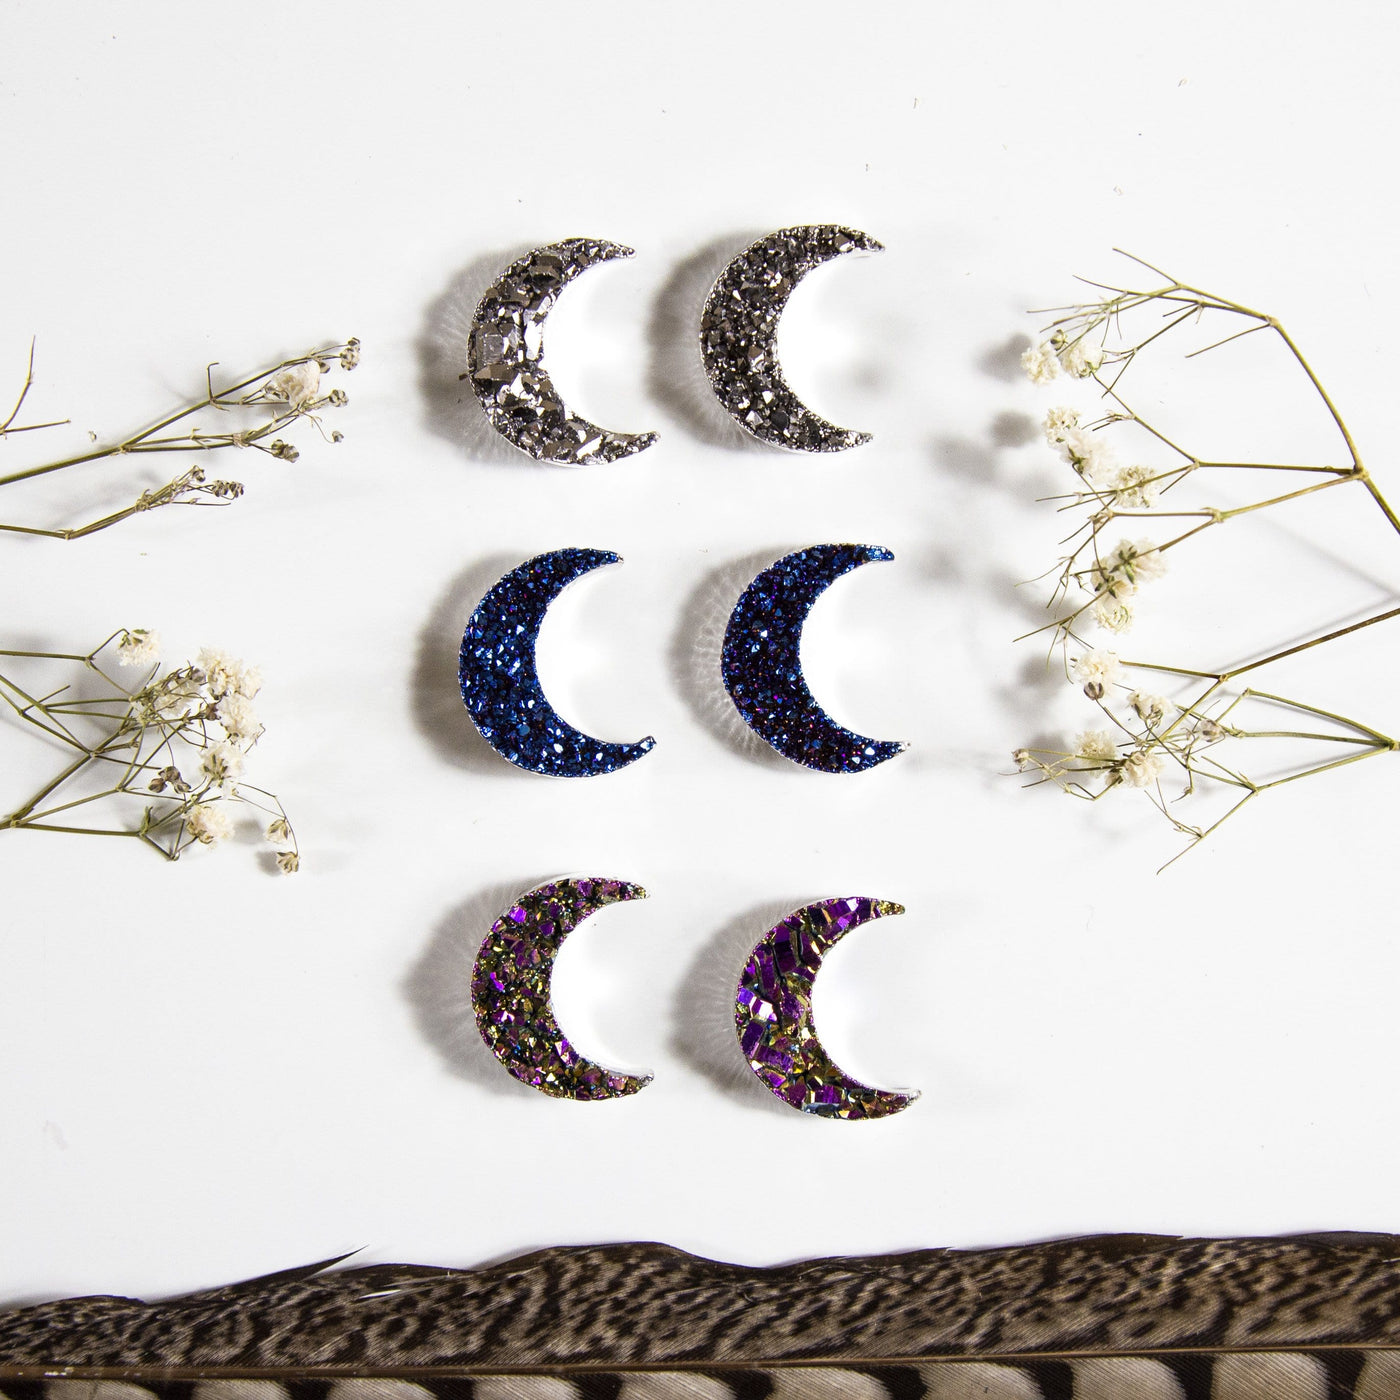 6 amethyst moons with titanium coating with decorations in the background